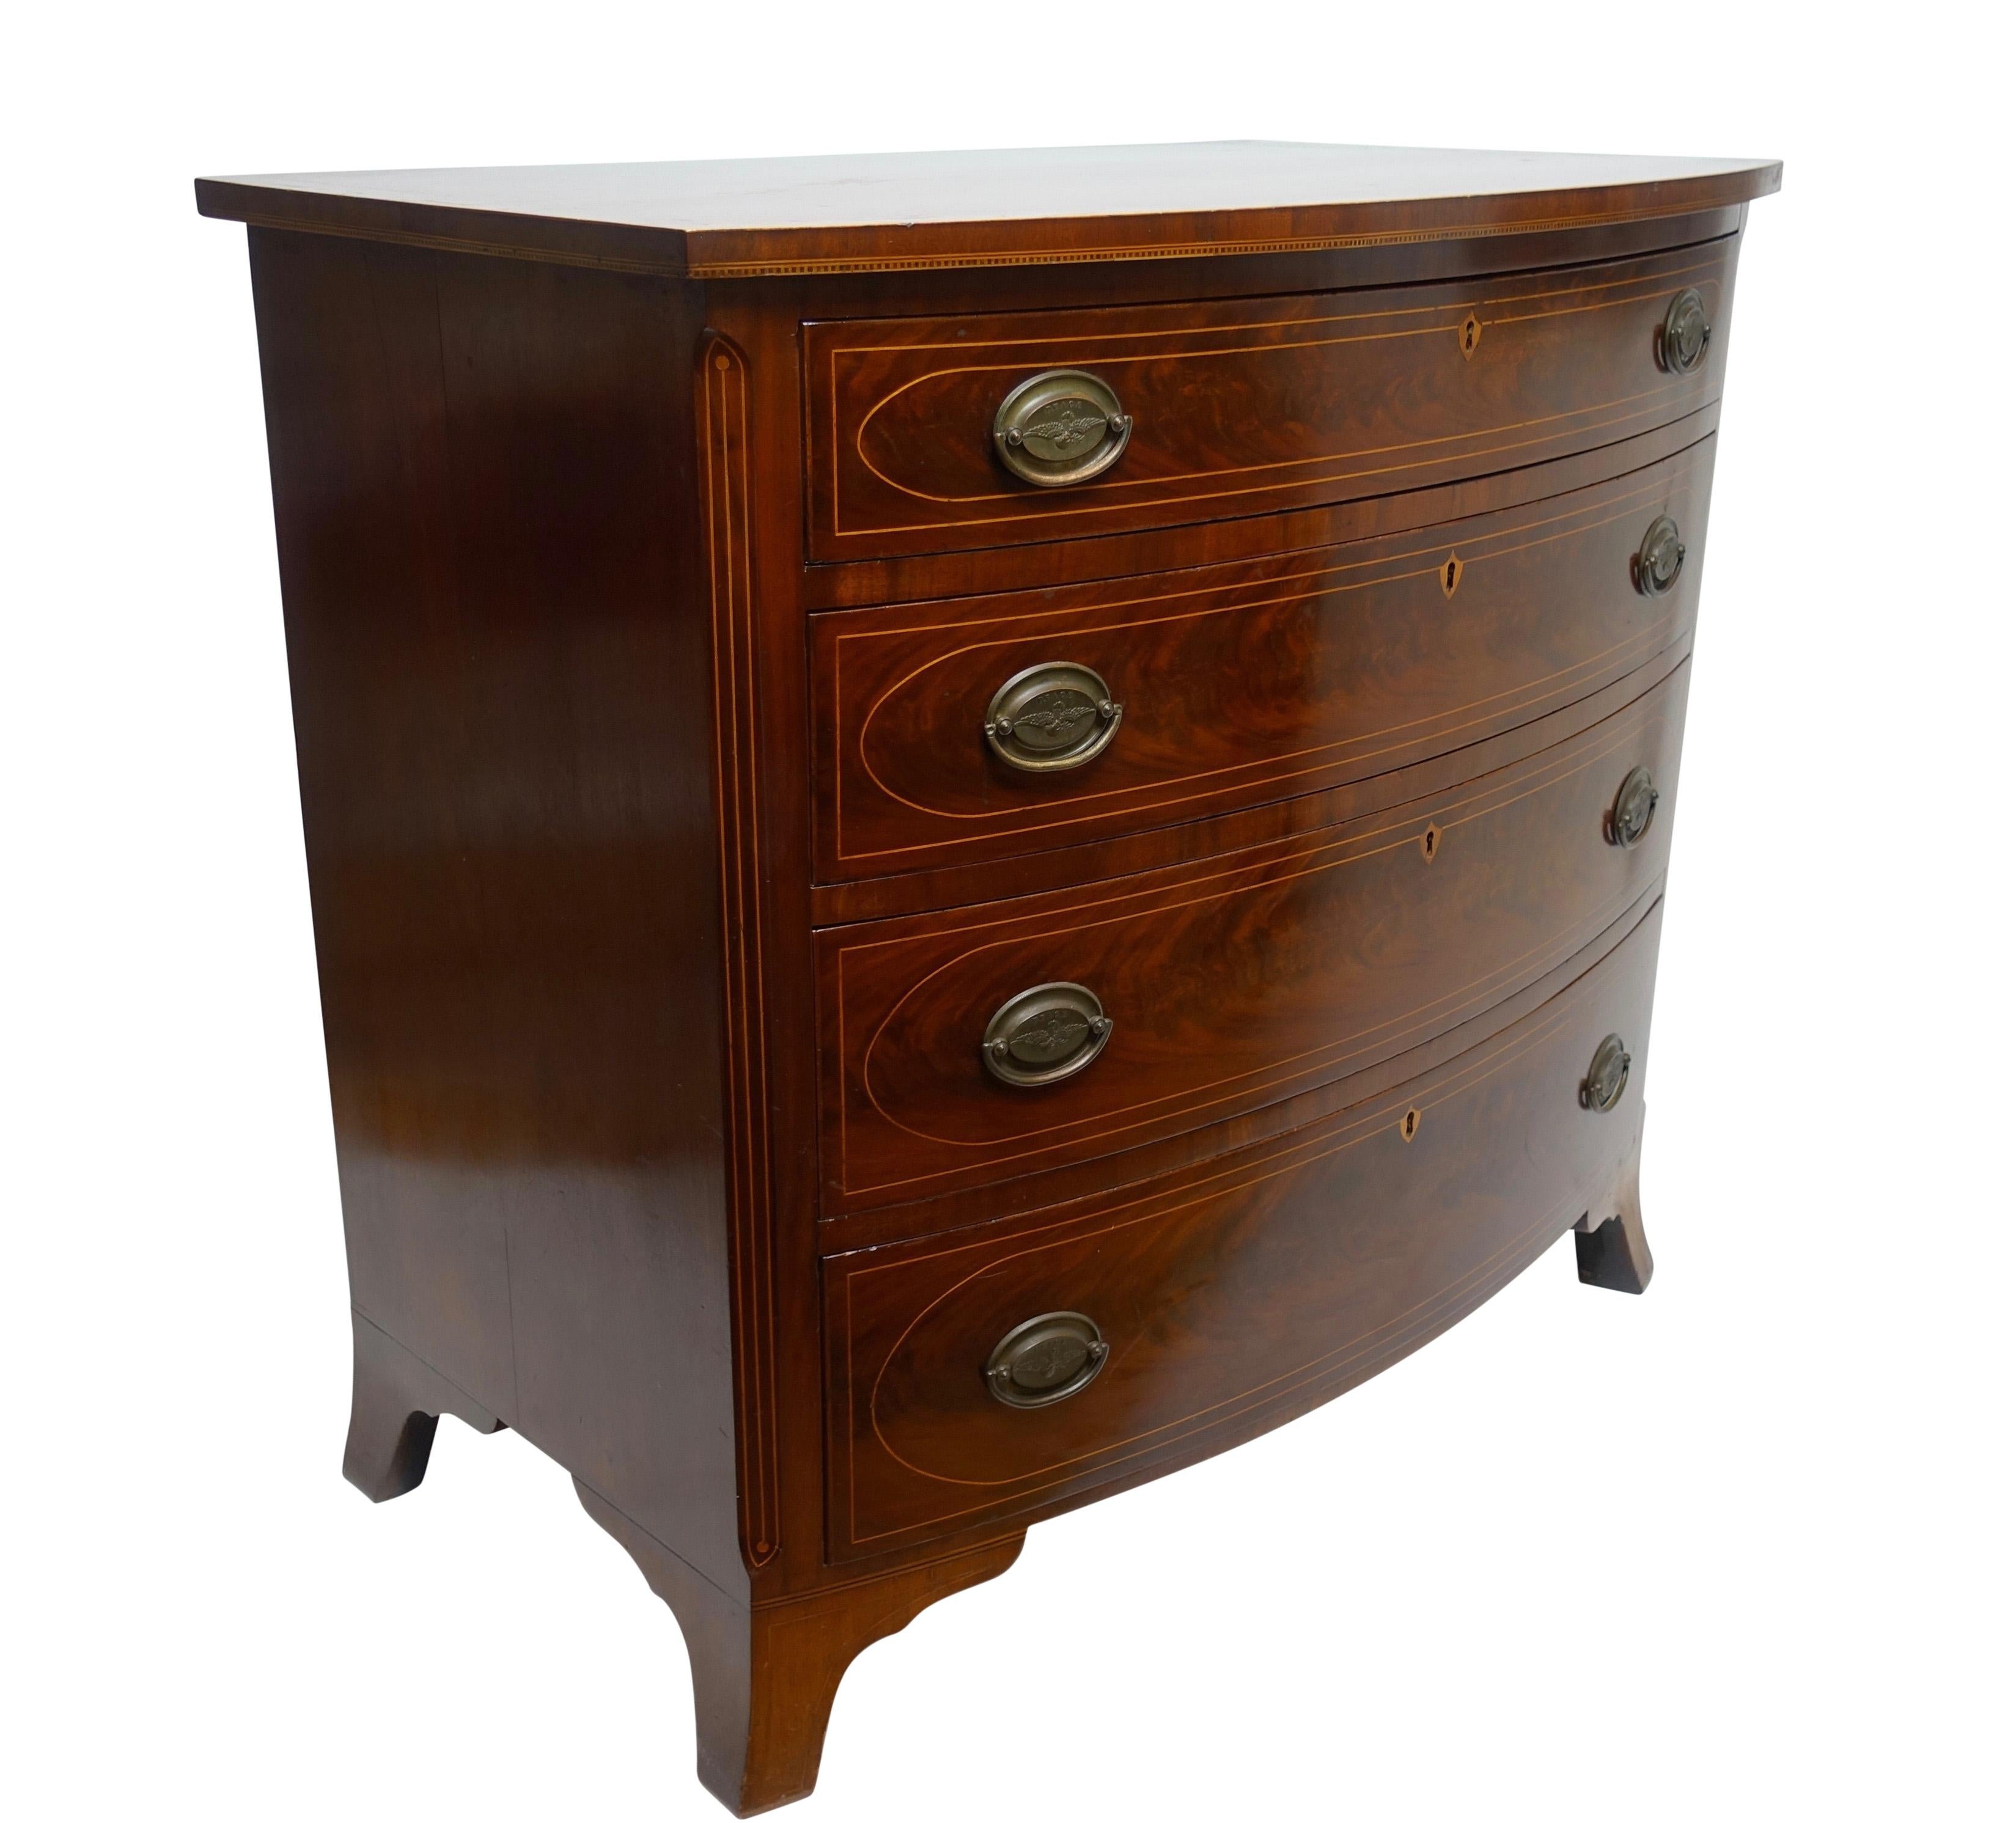 Federal period Mid-Atlantic American bow front mahogany chest of drawers with some very unusual details. Four graduated drawers, crossbanding around a part of the top, satinwood inlaid dental detailing around the bottom edge of the top with string